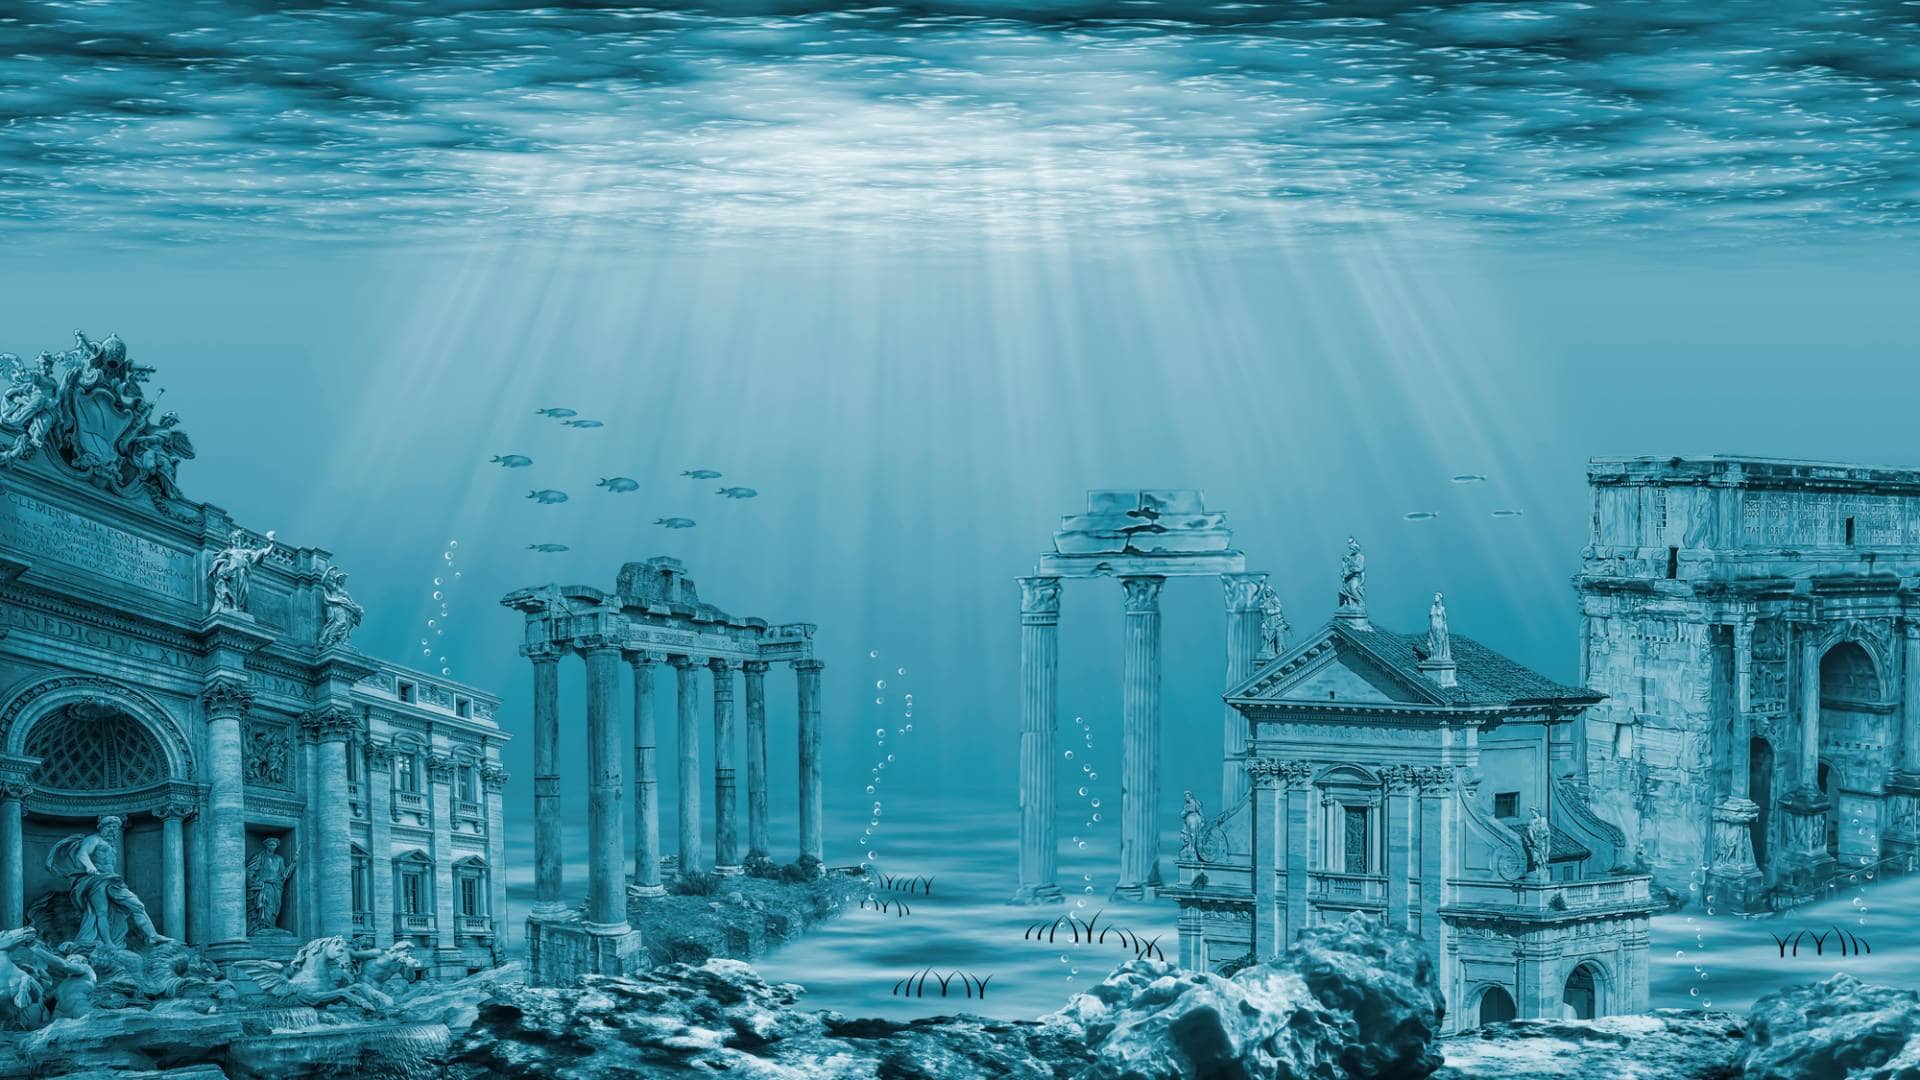 Where is/was the lost city of Atlantis supposed to be?